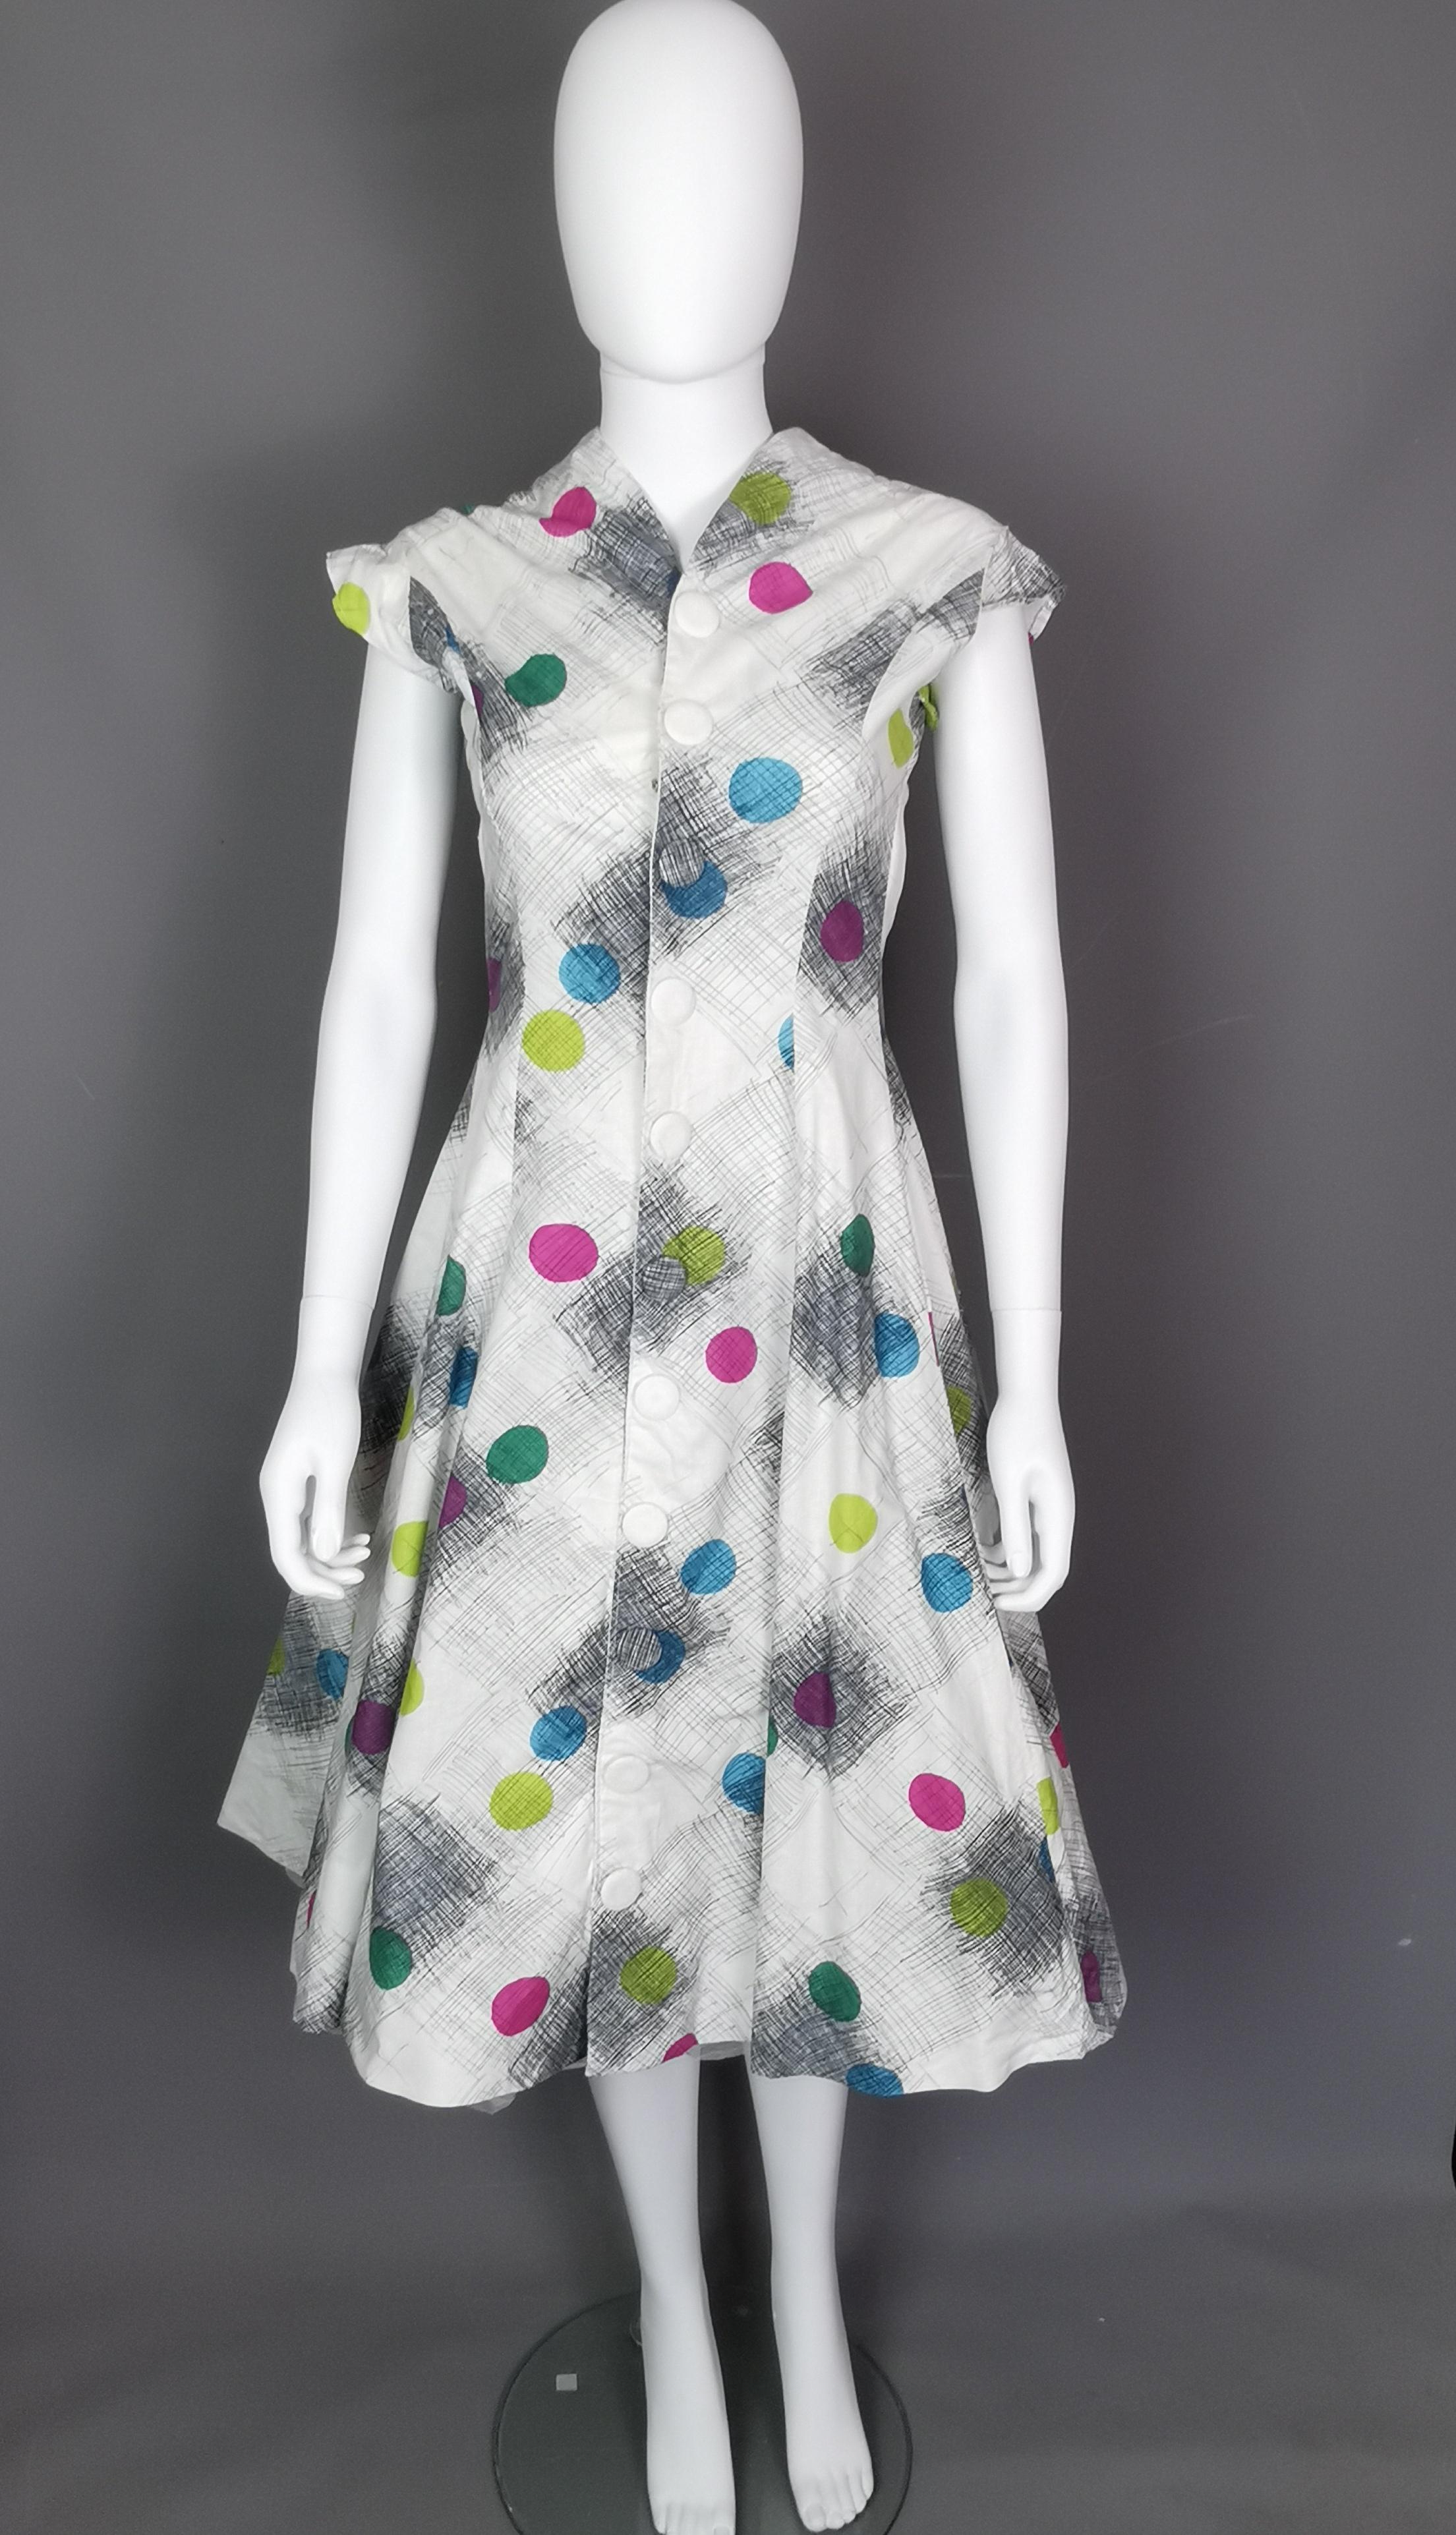 An incredible vintage original 1950s two piece dress.

It features a wonderful full skirted swing dress with a matching short sleeved bolero jacket.

The set is made from cotton with an abstract circles, space age style print.

It has a gorgeous and